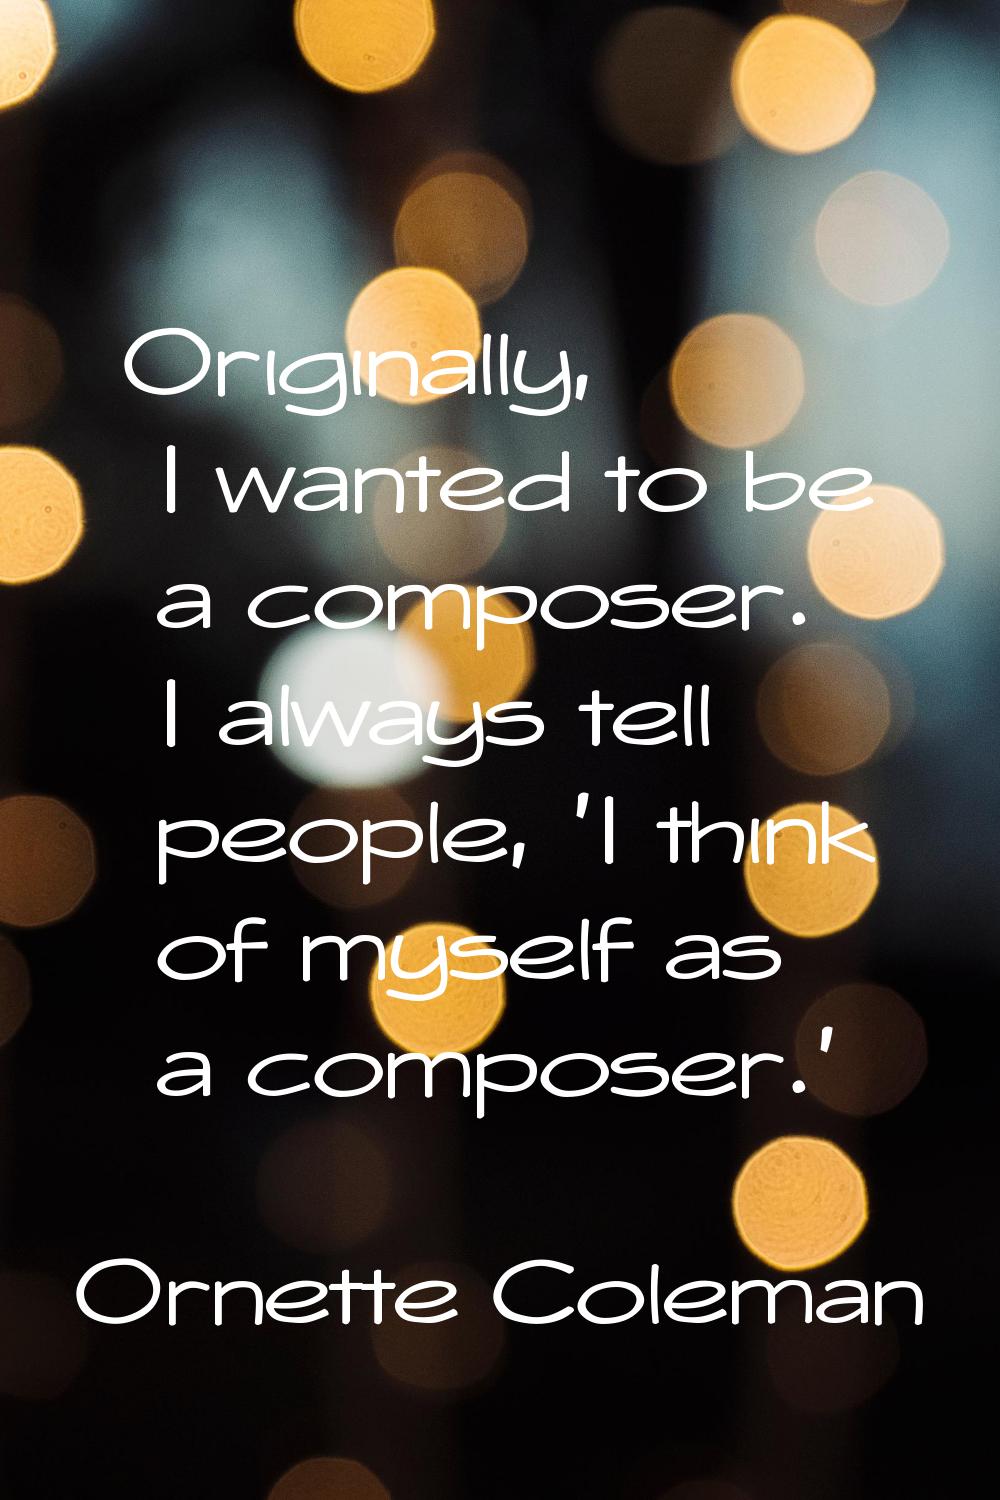 Originally, I wanted to be a composer. I always tell people, 'I think of myself as a composer.'